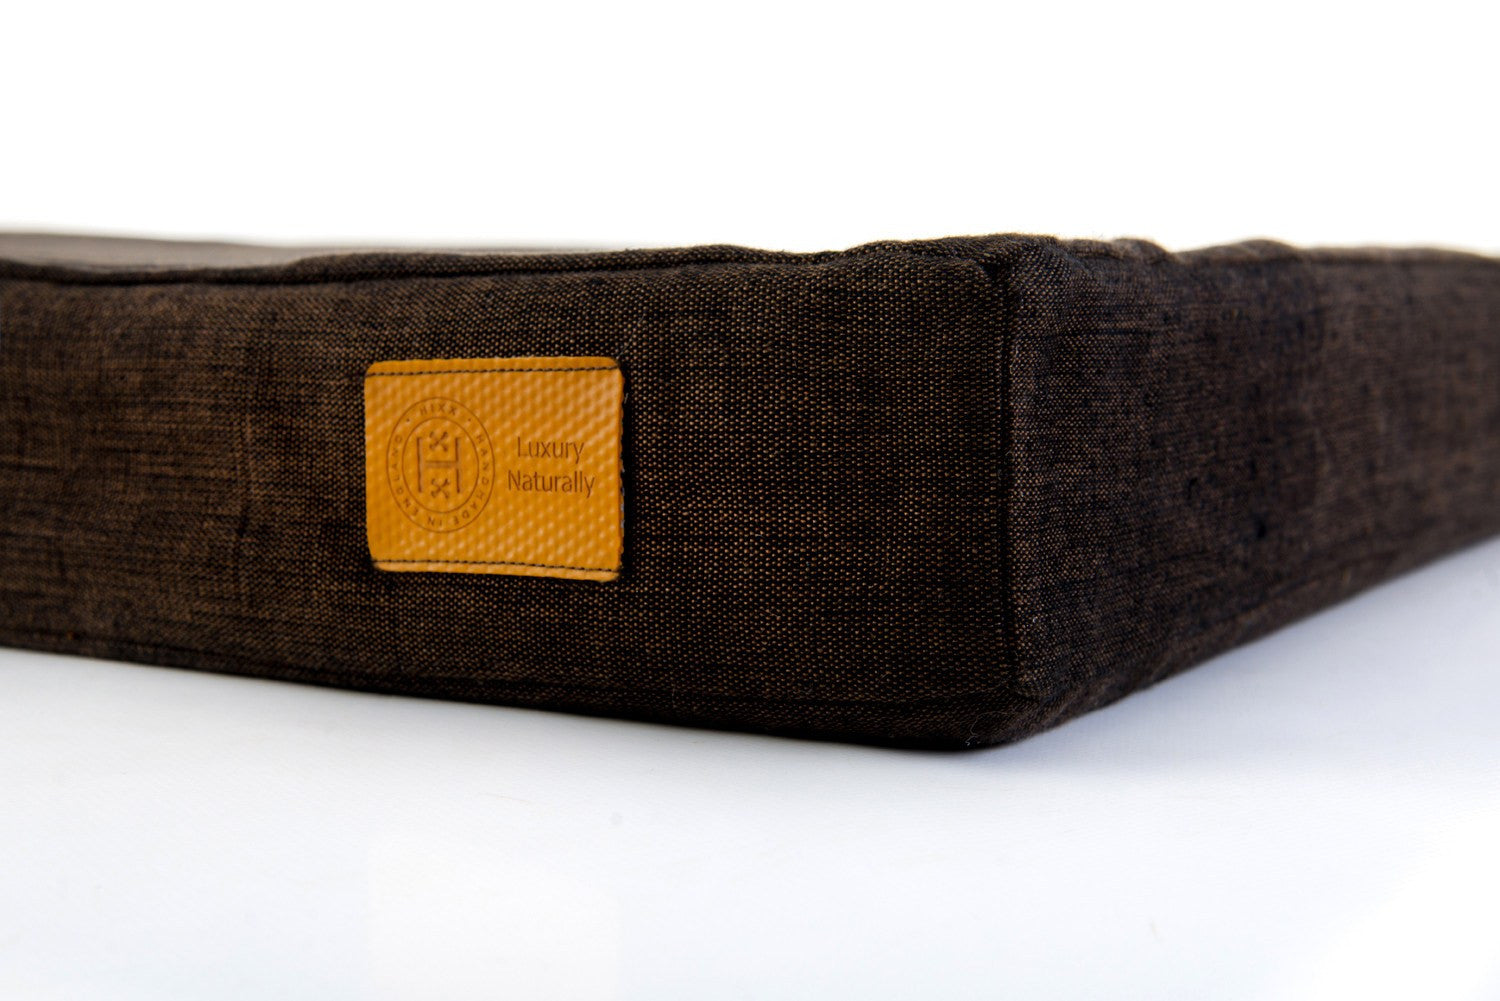 Detail of British made organic brown cotton Wild Rover natural dog bed from Hixx.